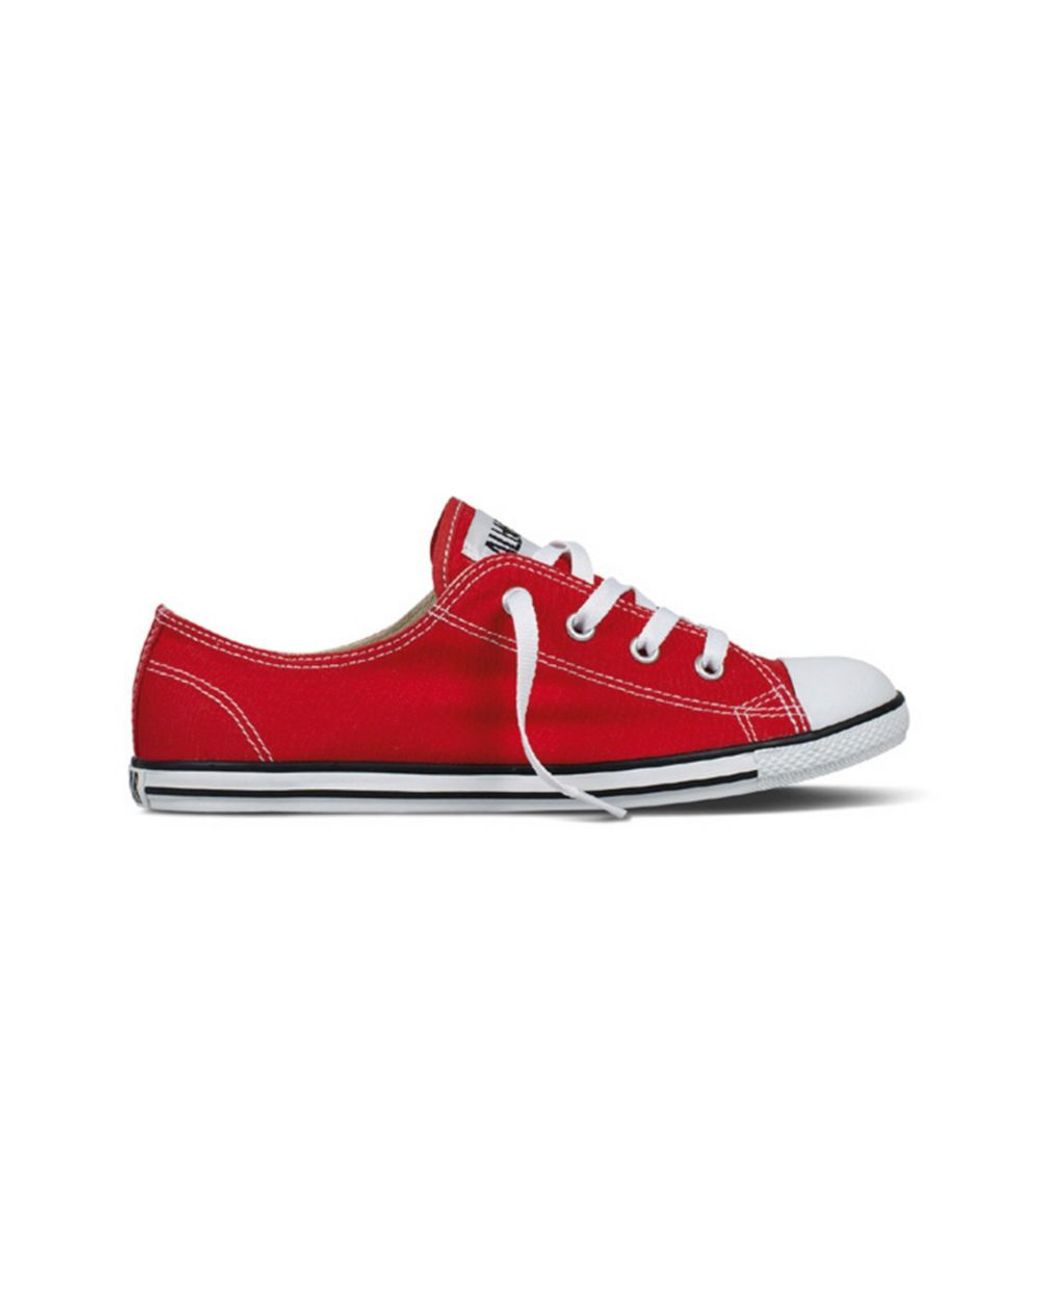 Converse Chuck Taylor All Star Dainty Sneakers in Red | Lyst